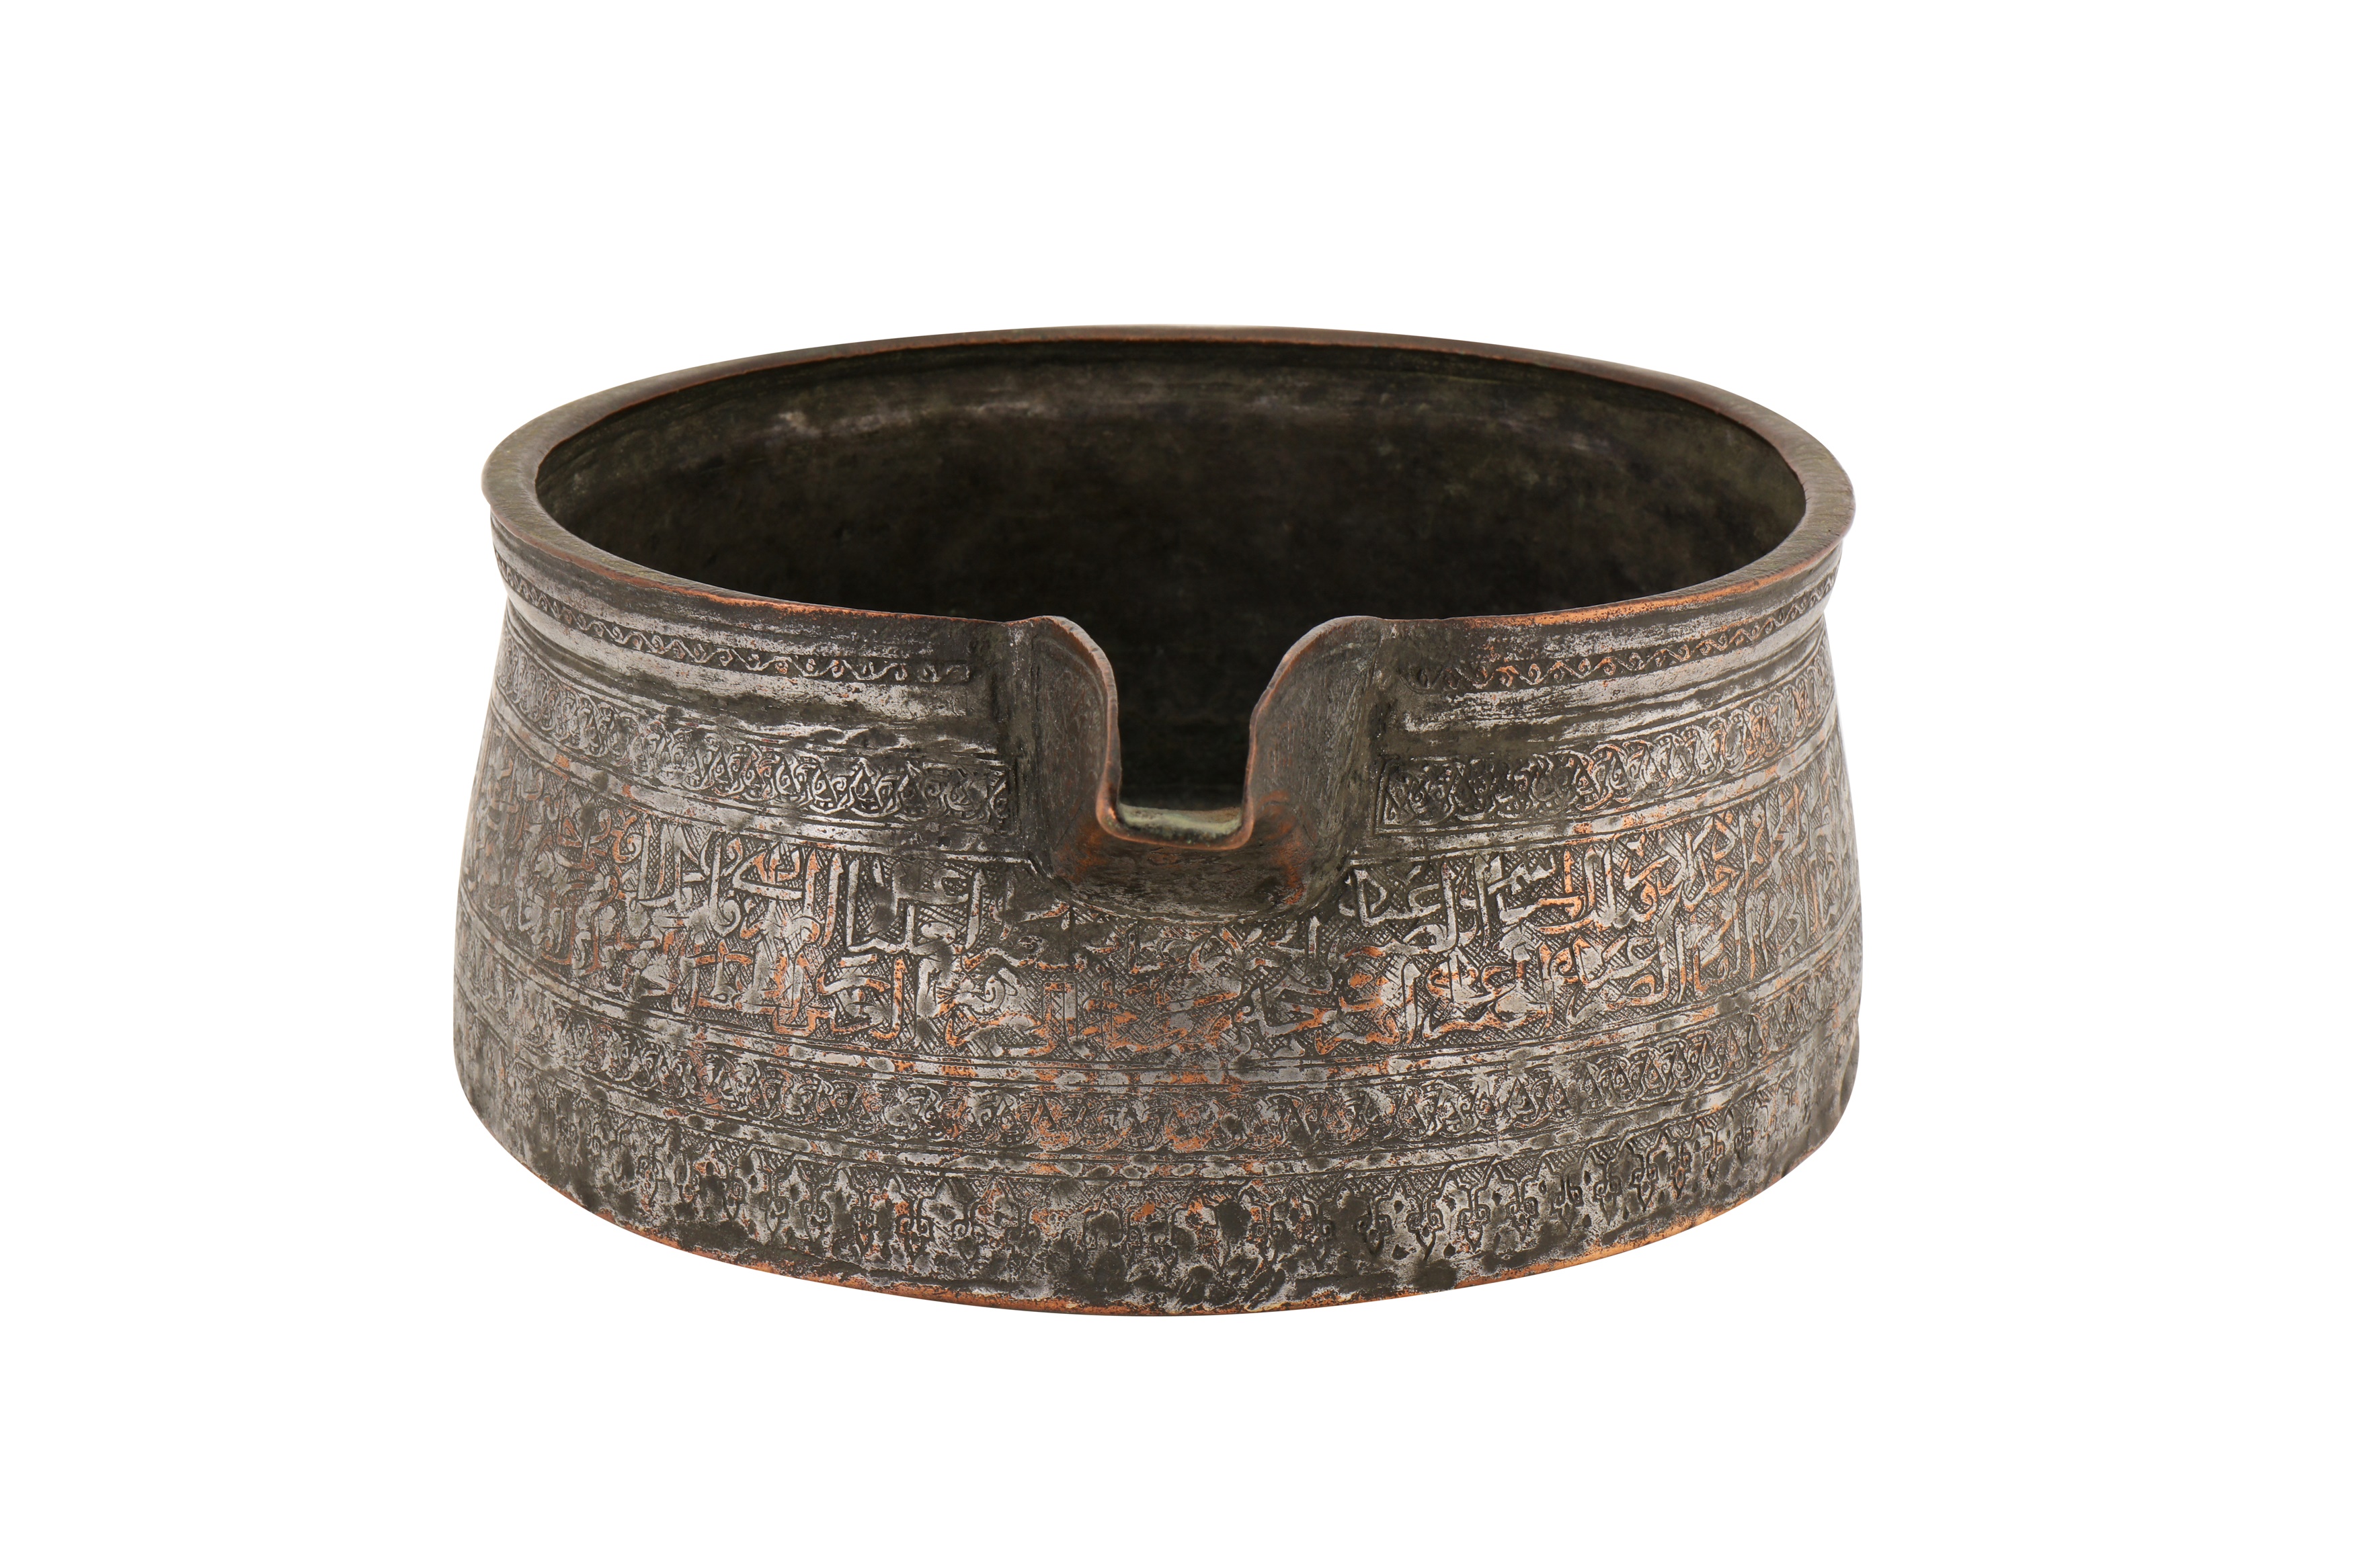 A 14TH-15TH CENTURY SYRIAN MAMLUK TINNED COPPER SPOUTED BOWL - Image 5 of 5